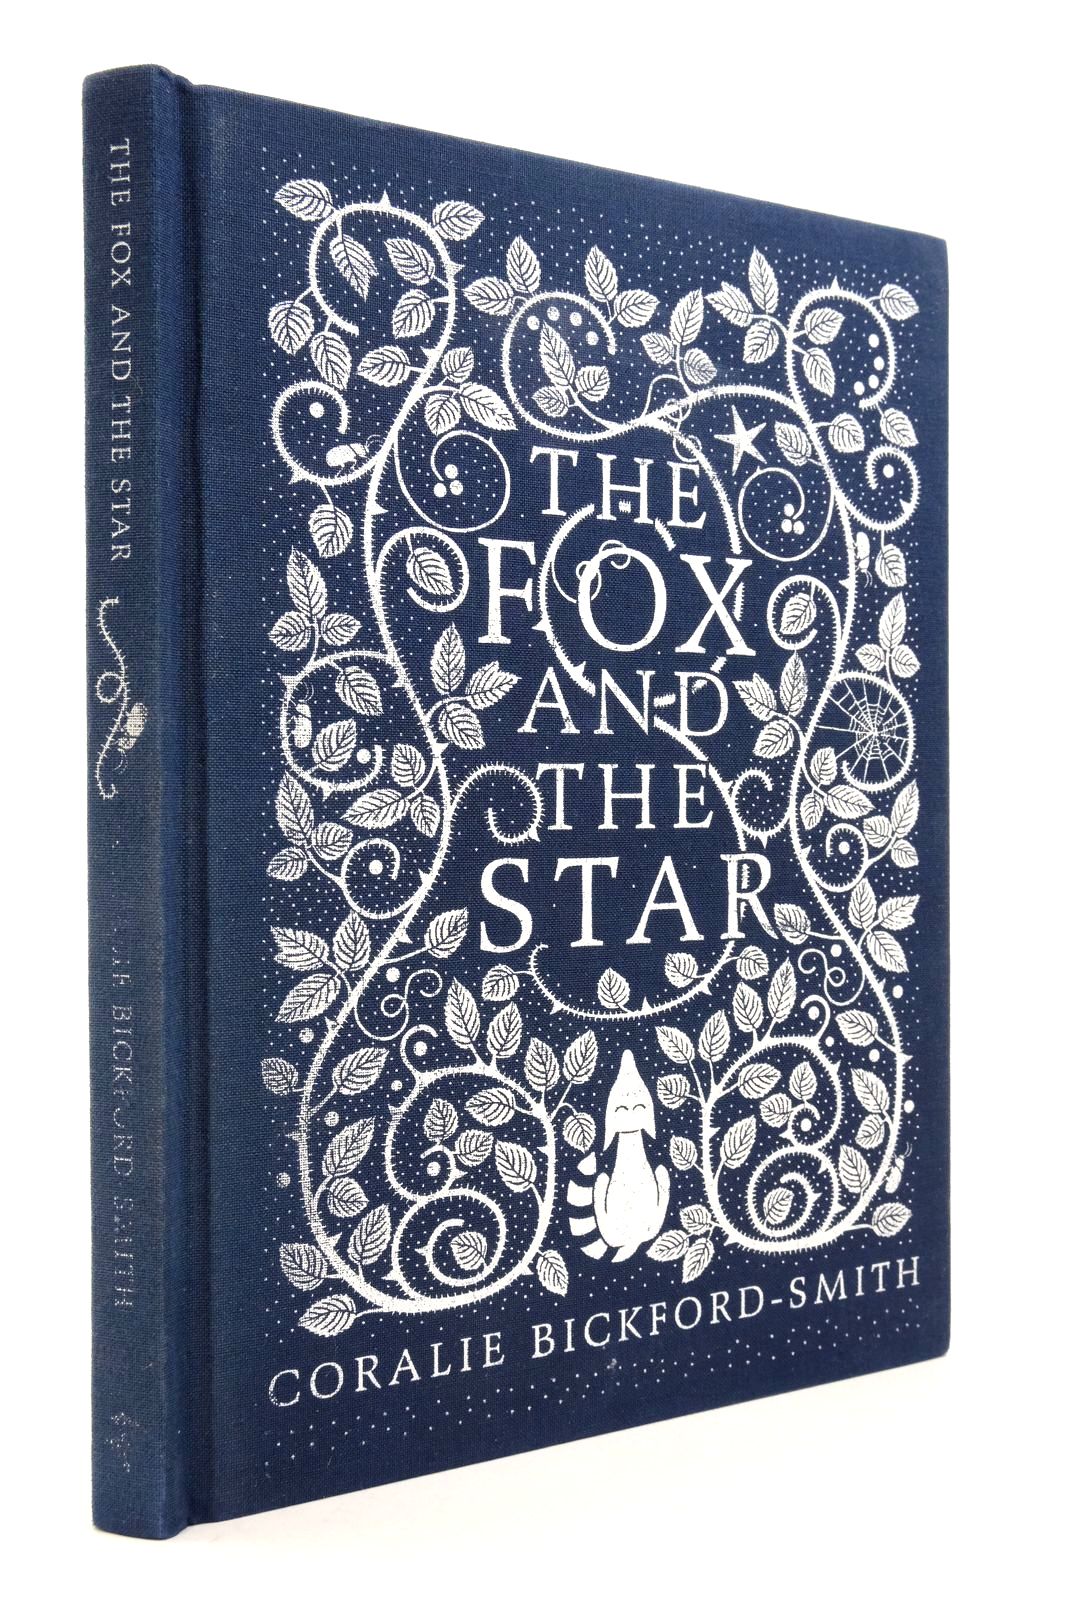 Photo of THE FOX AND THE STAR written by Bickford-Smith, Coralie illustrated by Bickford-Smith, Coralie published by Particular Books (STOCK CODE: 2138835)  for sale by Stella & Rose's Books